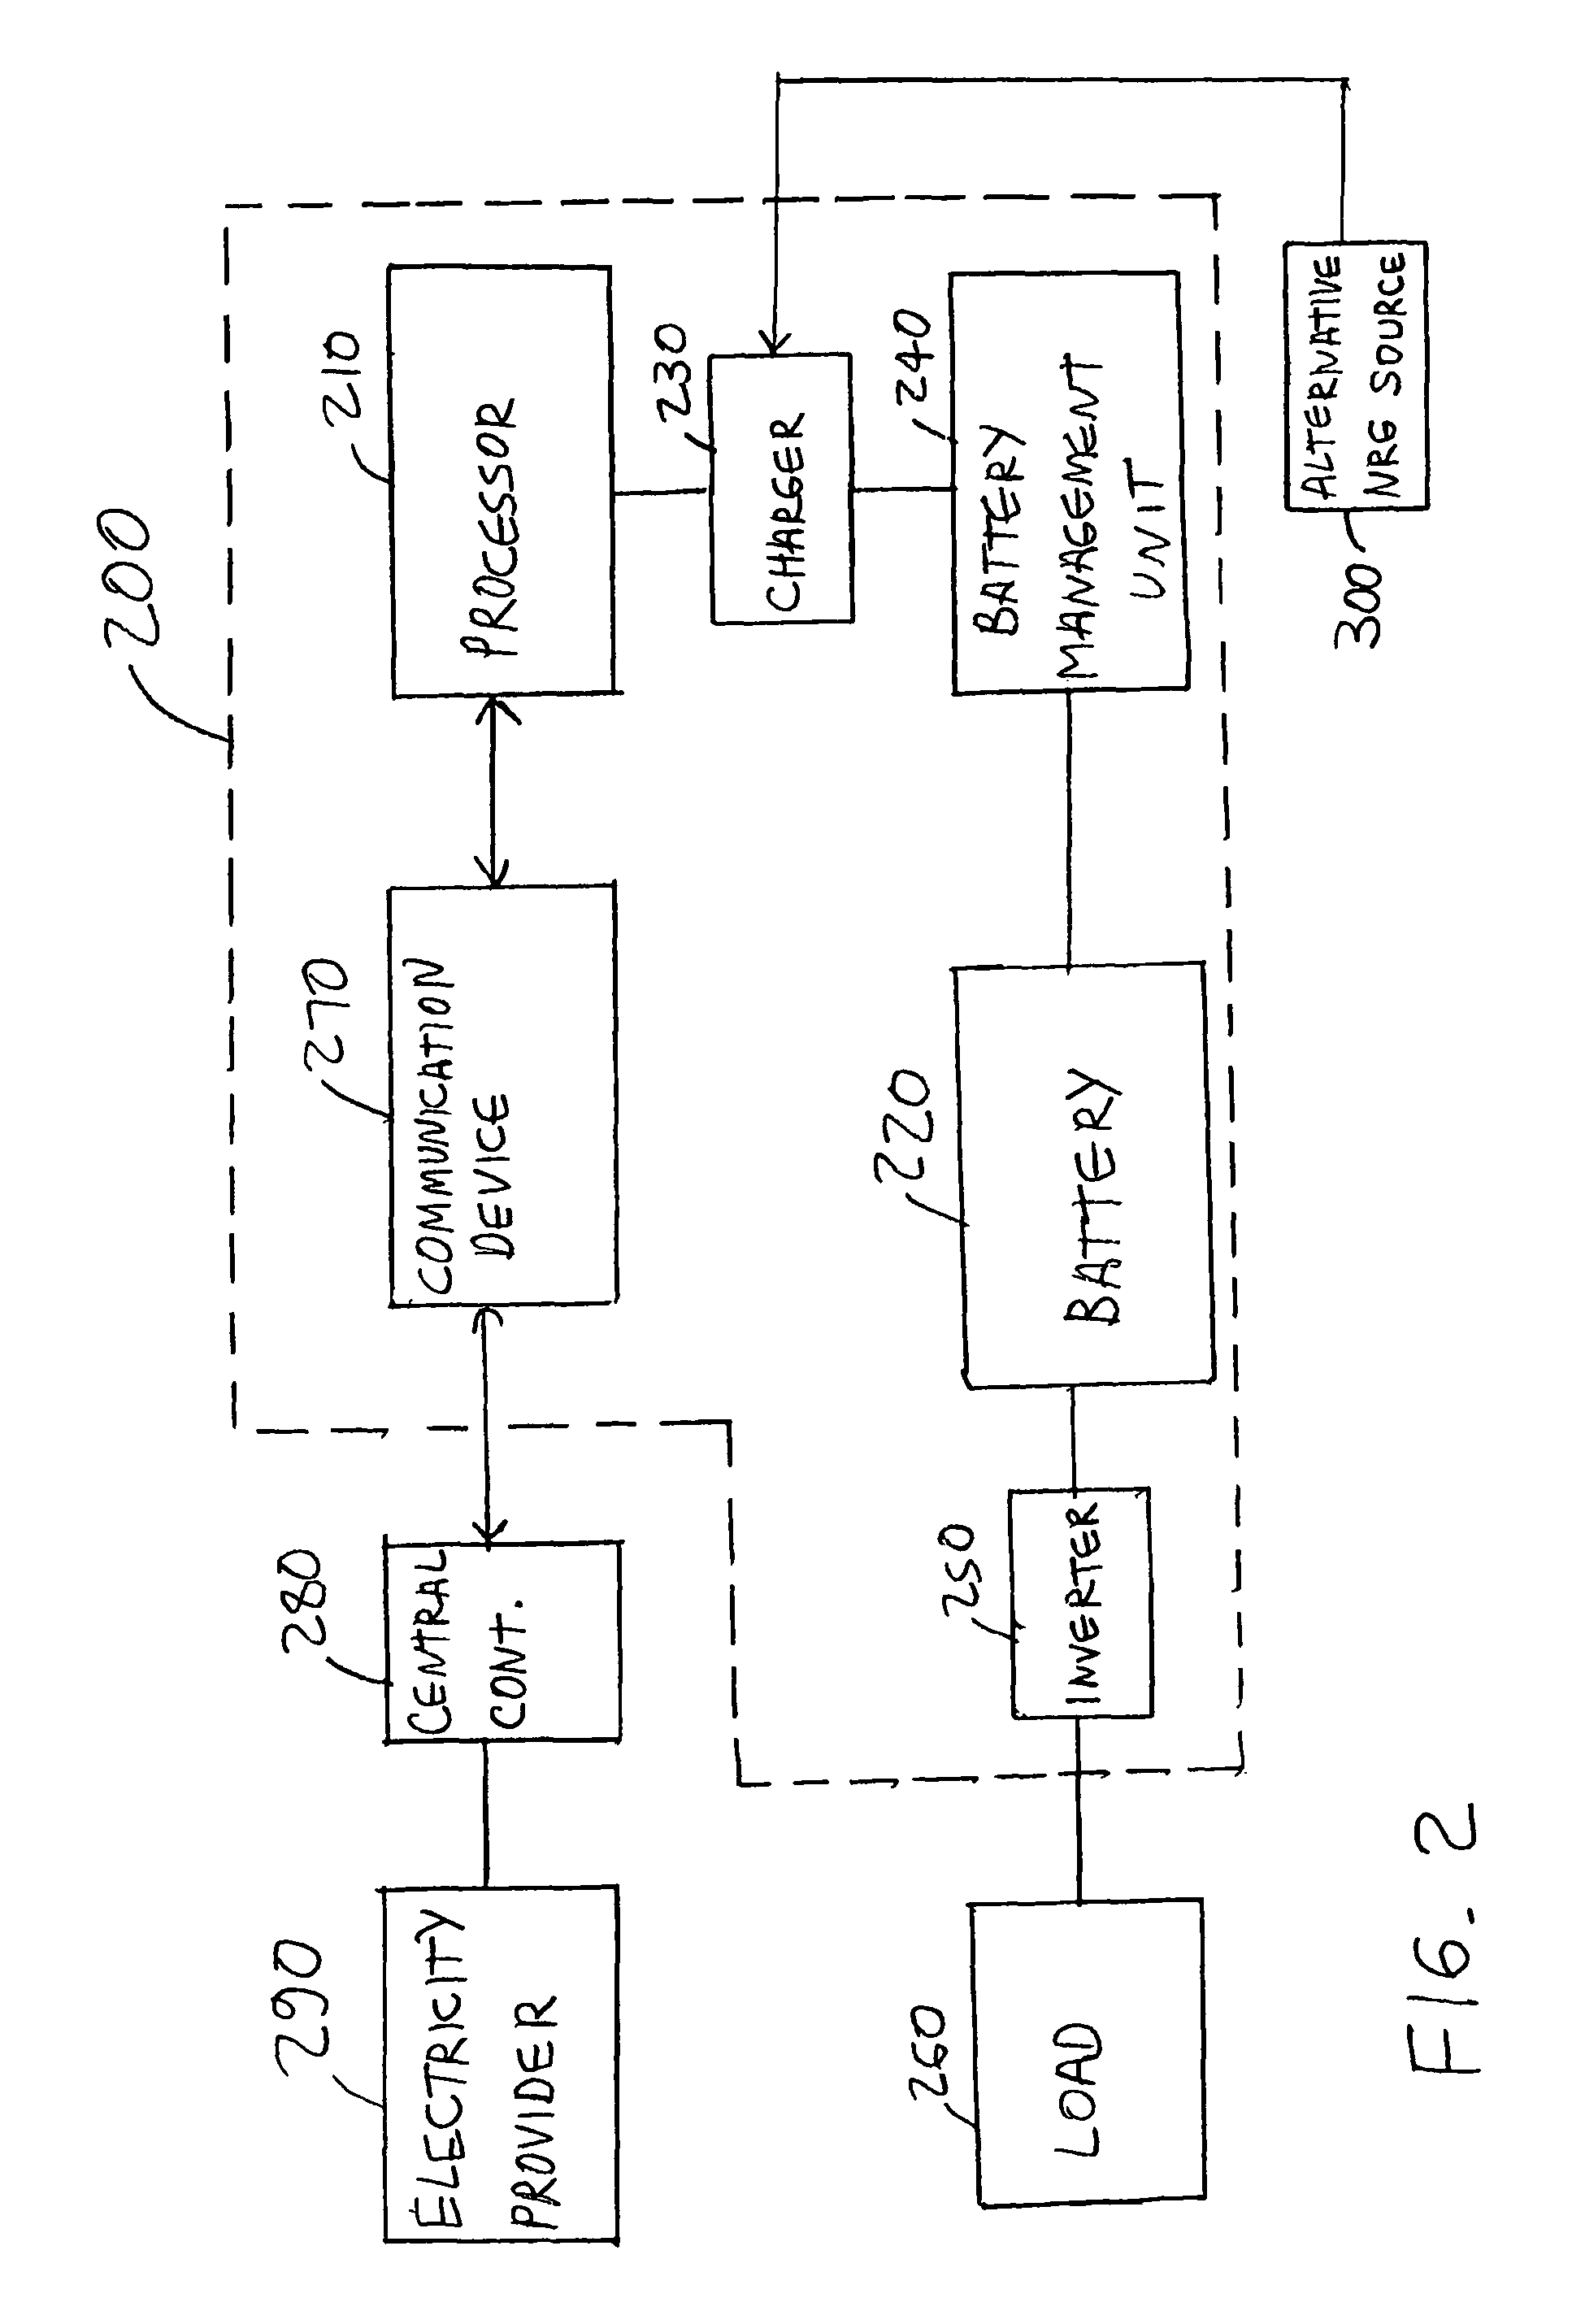 Consumer-sited power management system and method